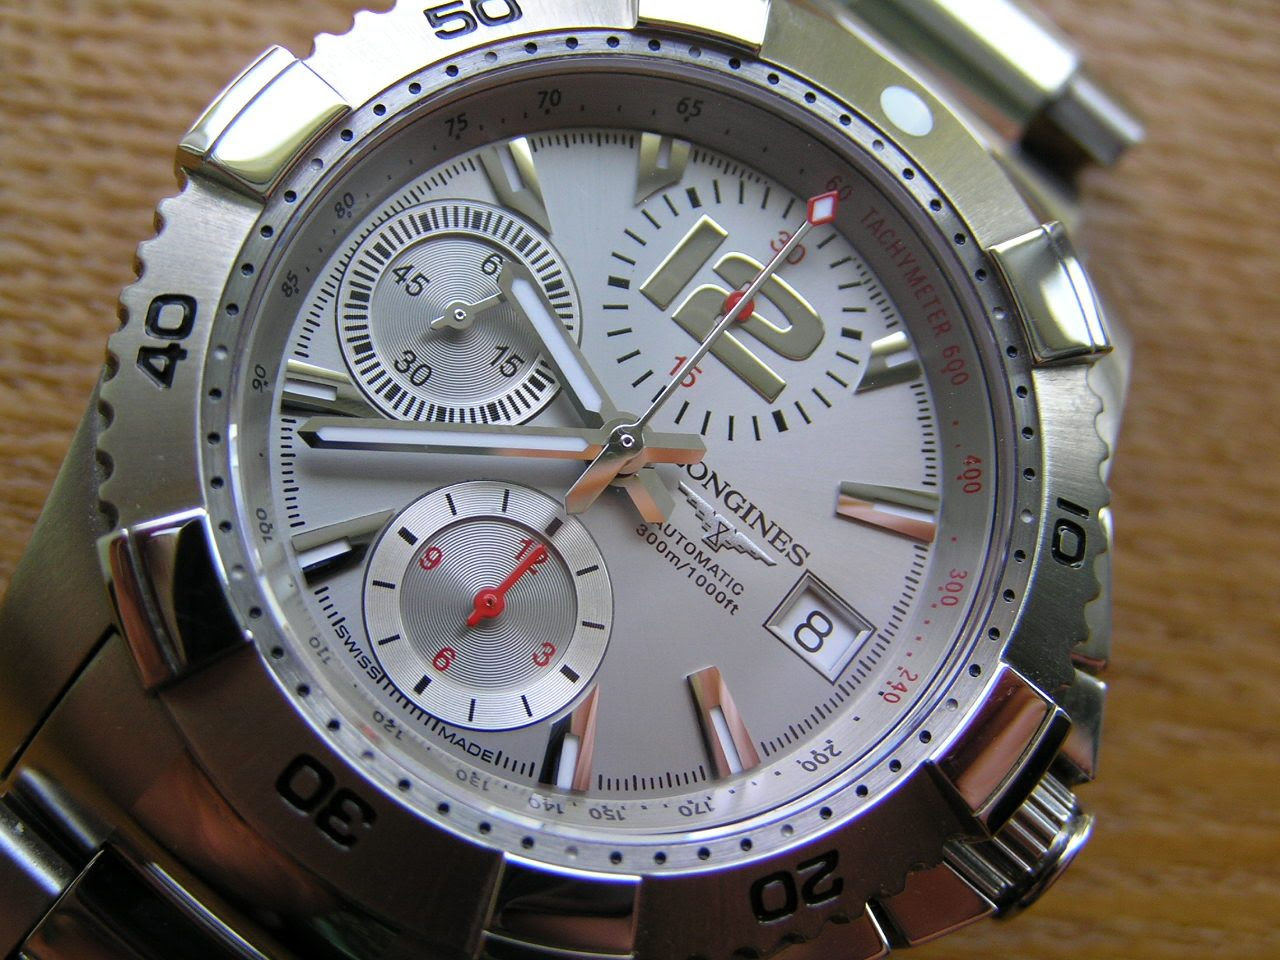 Watch Reviews by MCV: Review of Longines Hydroconquest Automatic ...